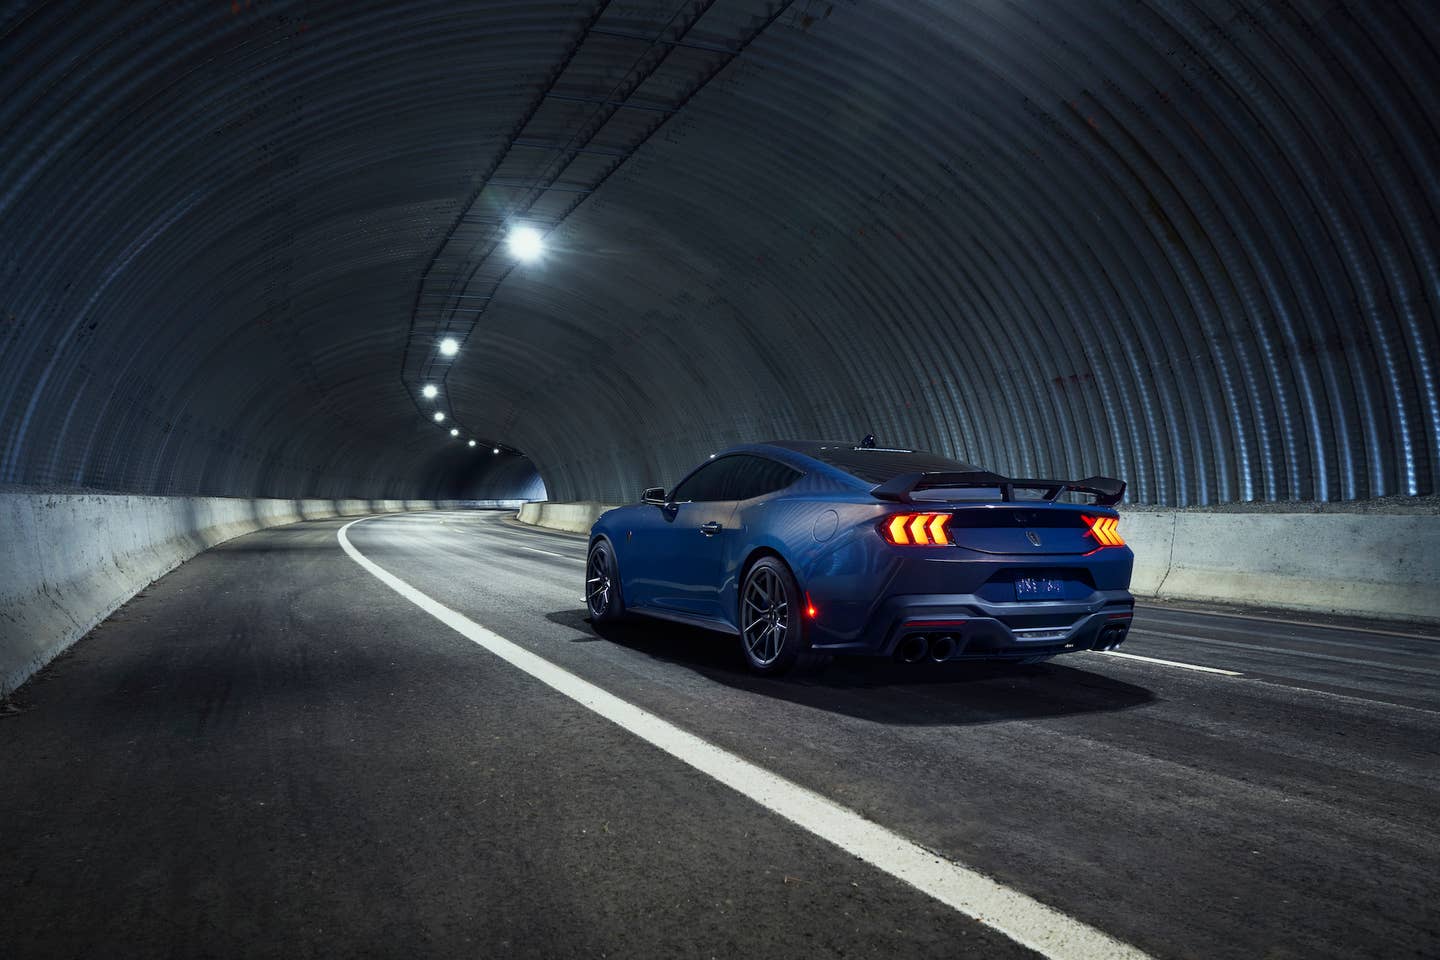 The Ford Mustang Dark Horse: A Brooding, 500-HP Track Star With a ...